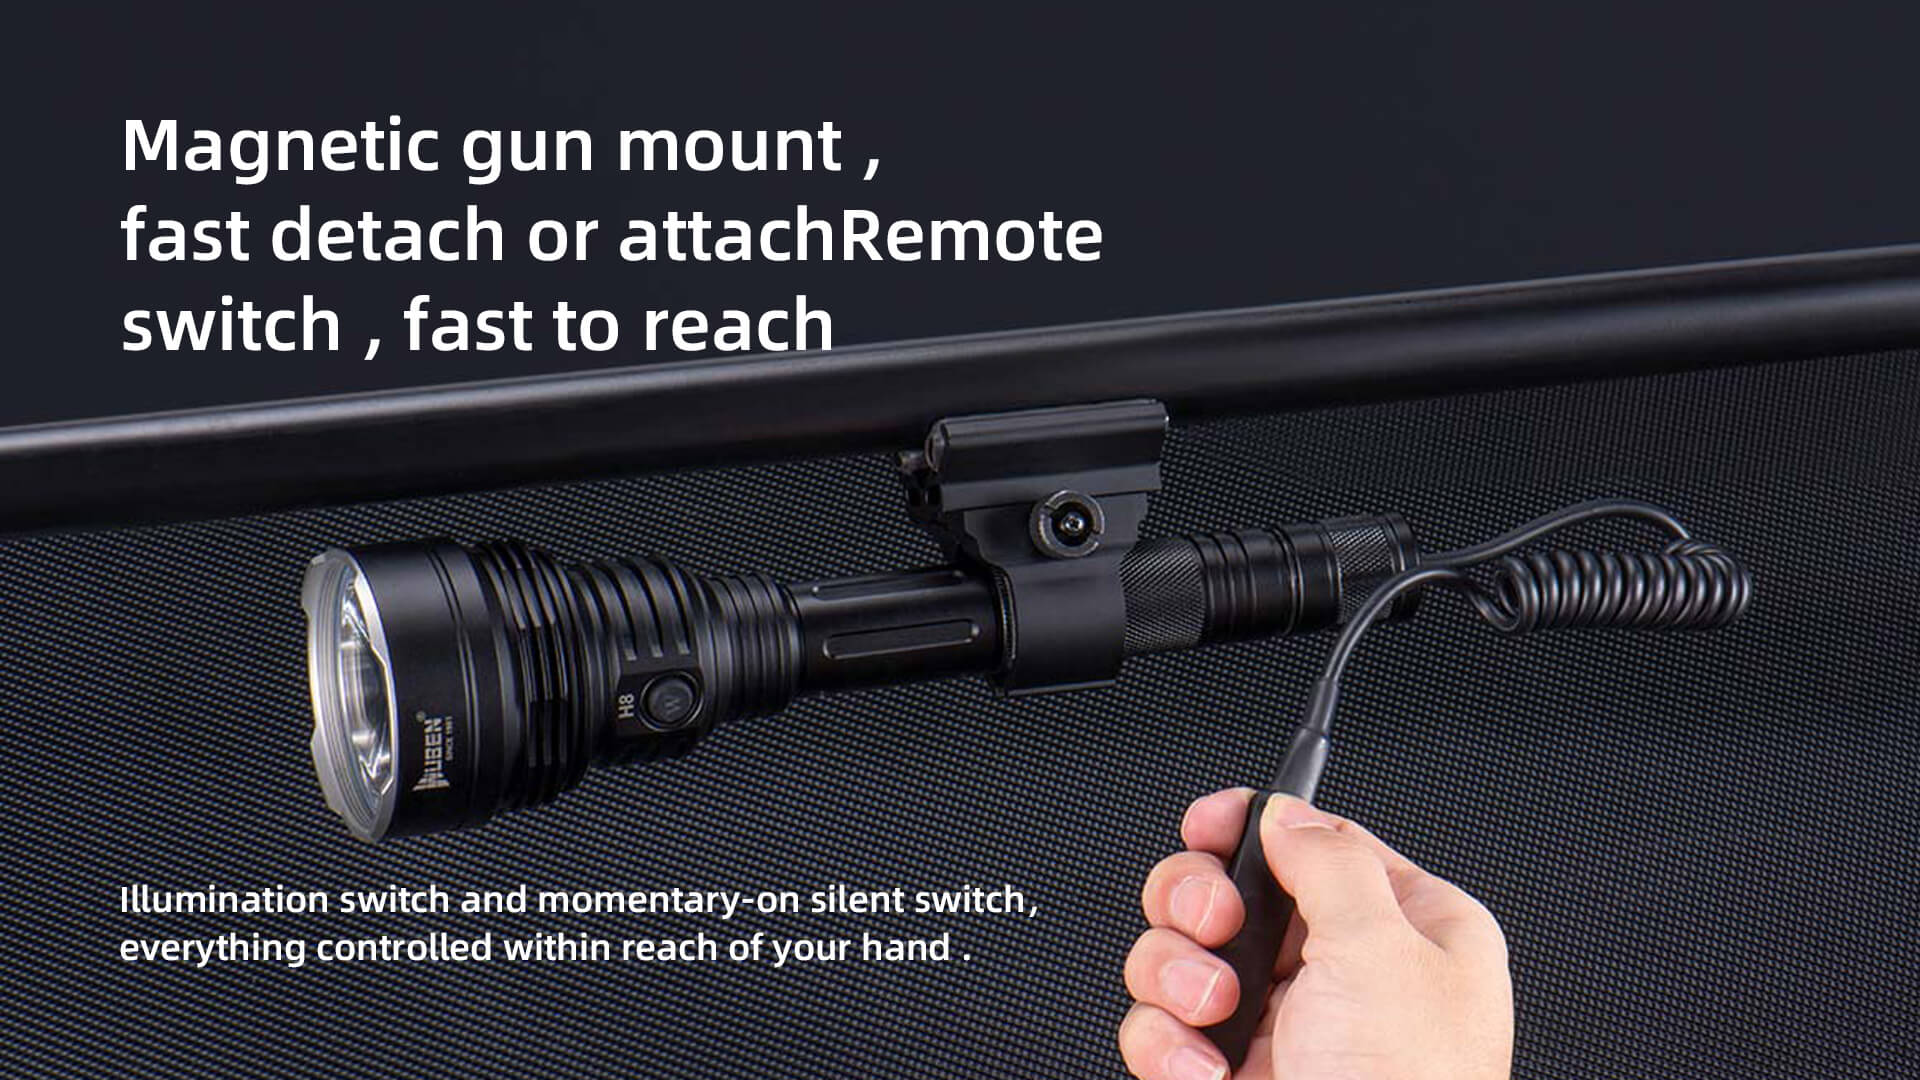 Magnetic gun mount fast to reach